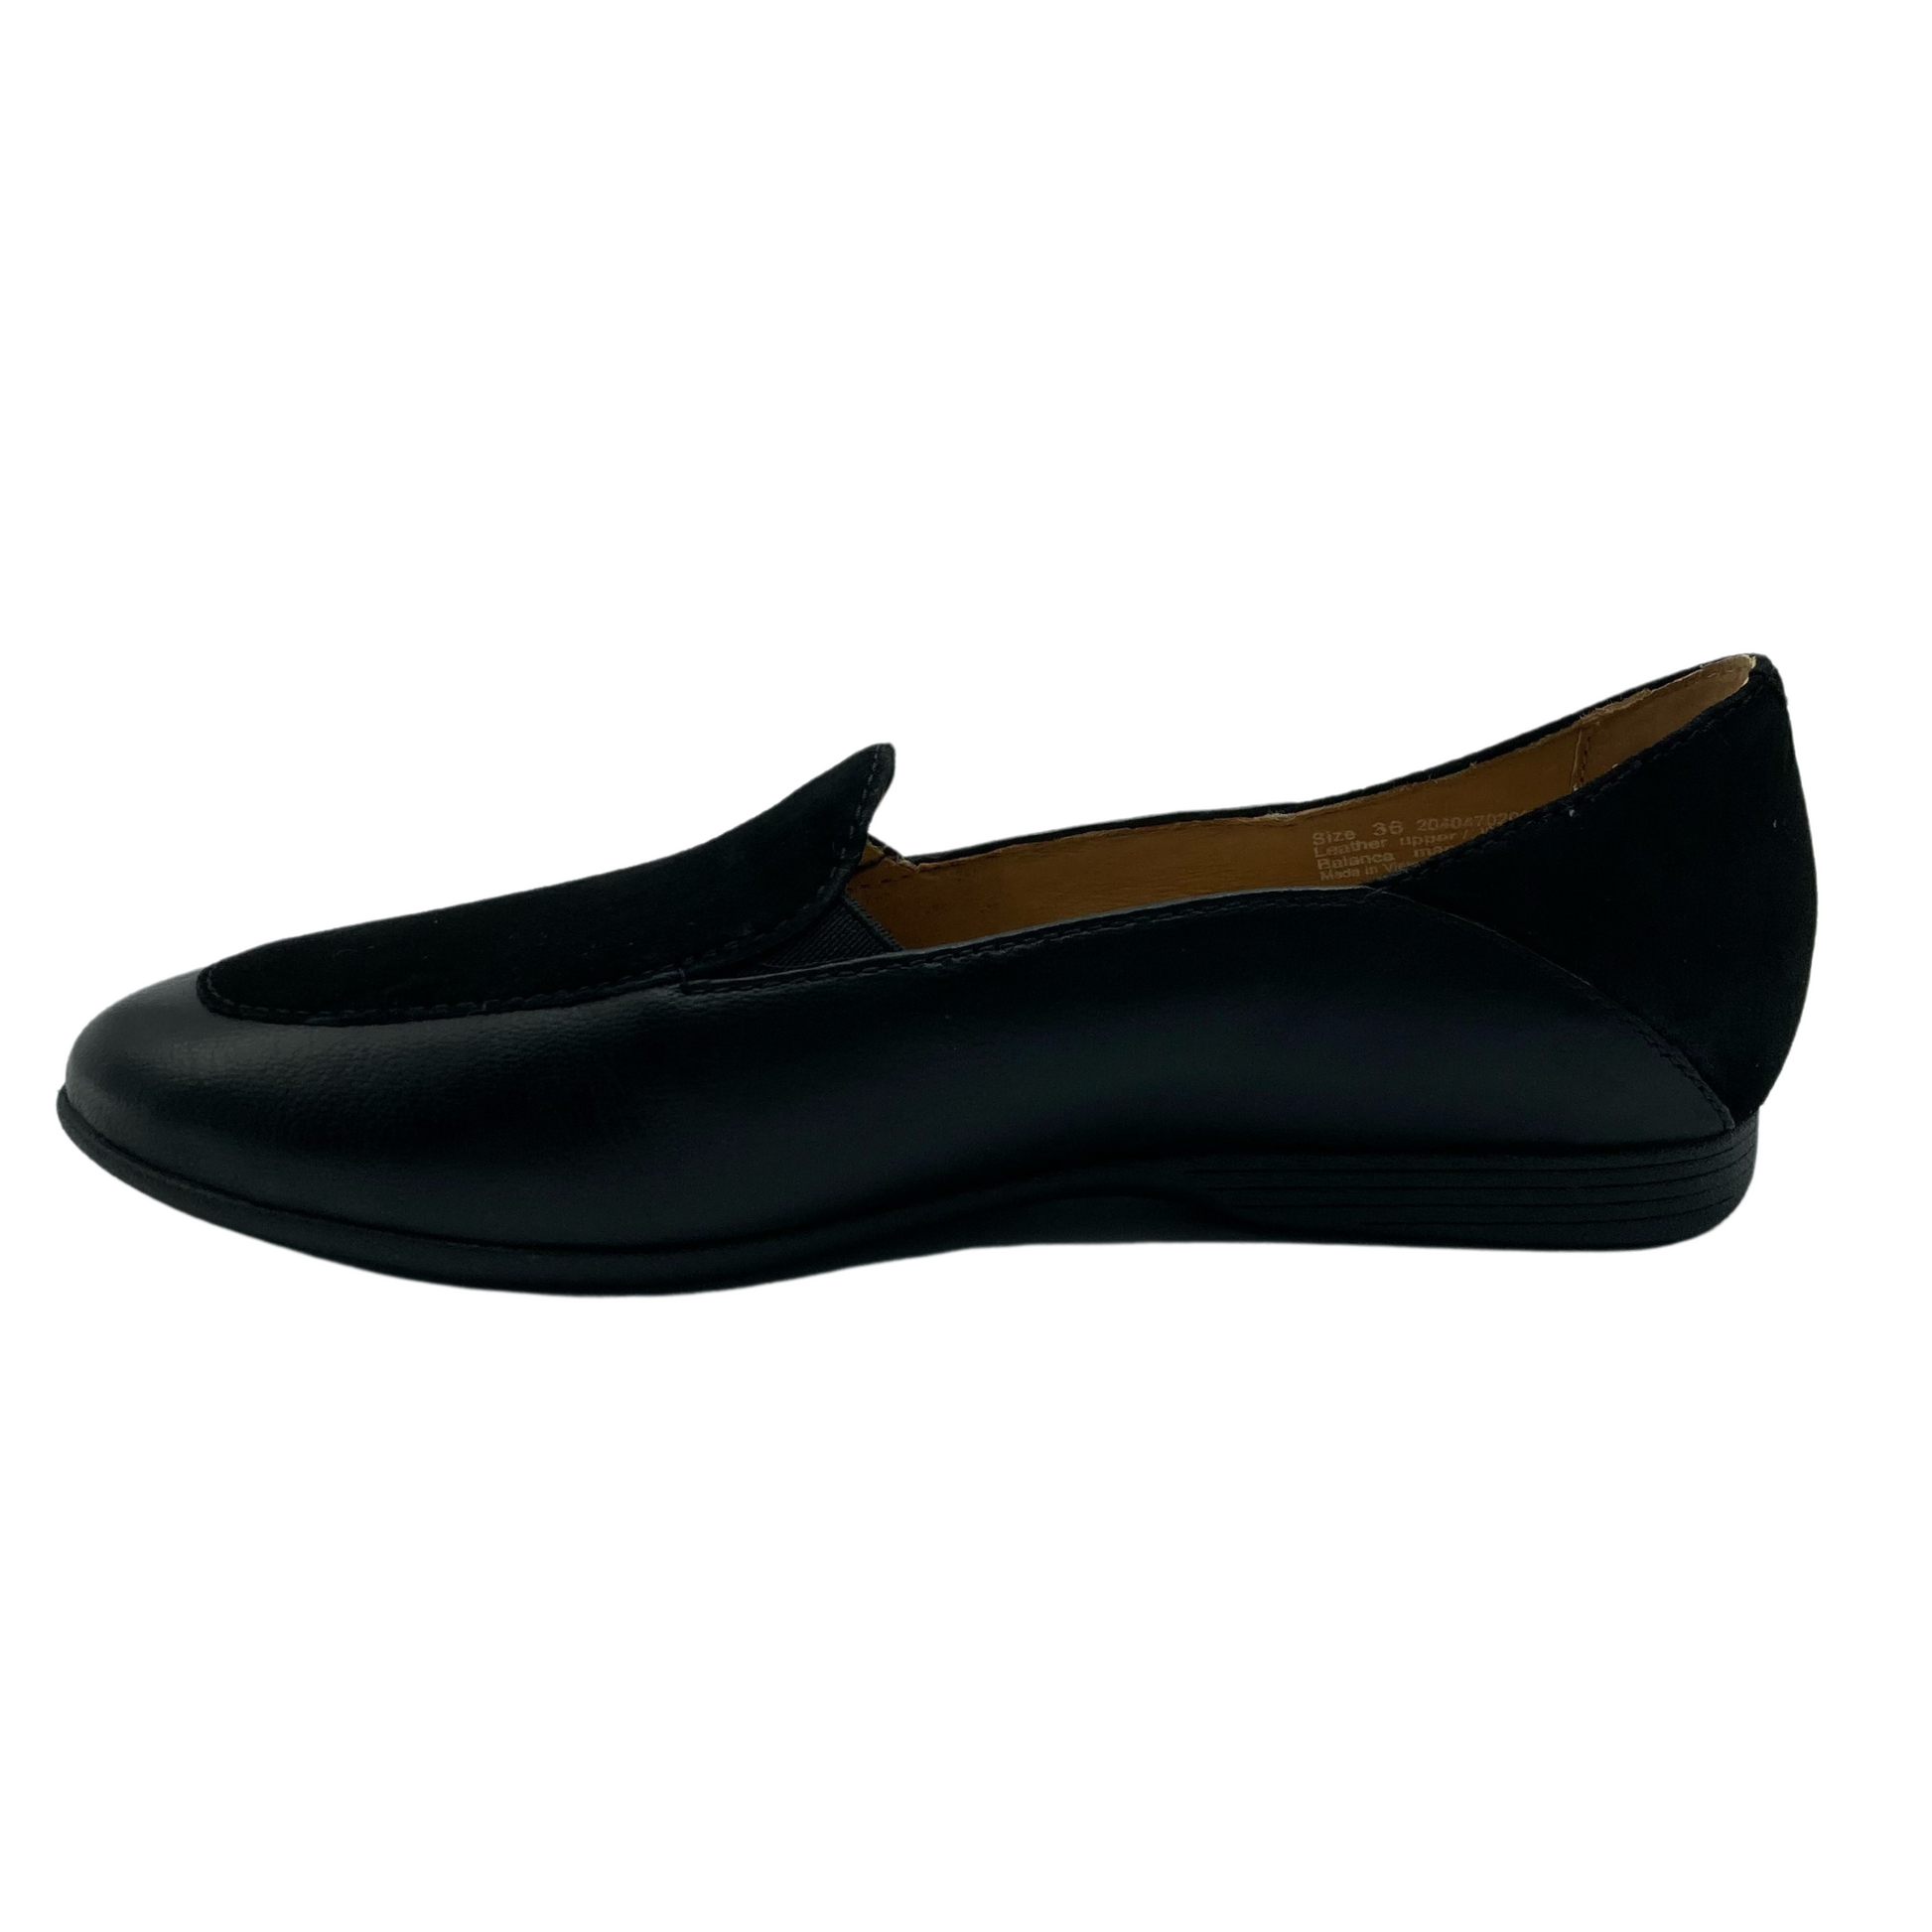 Left facing view of black leather flat shoe